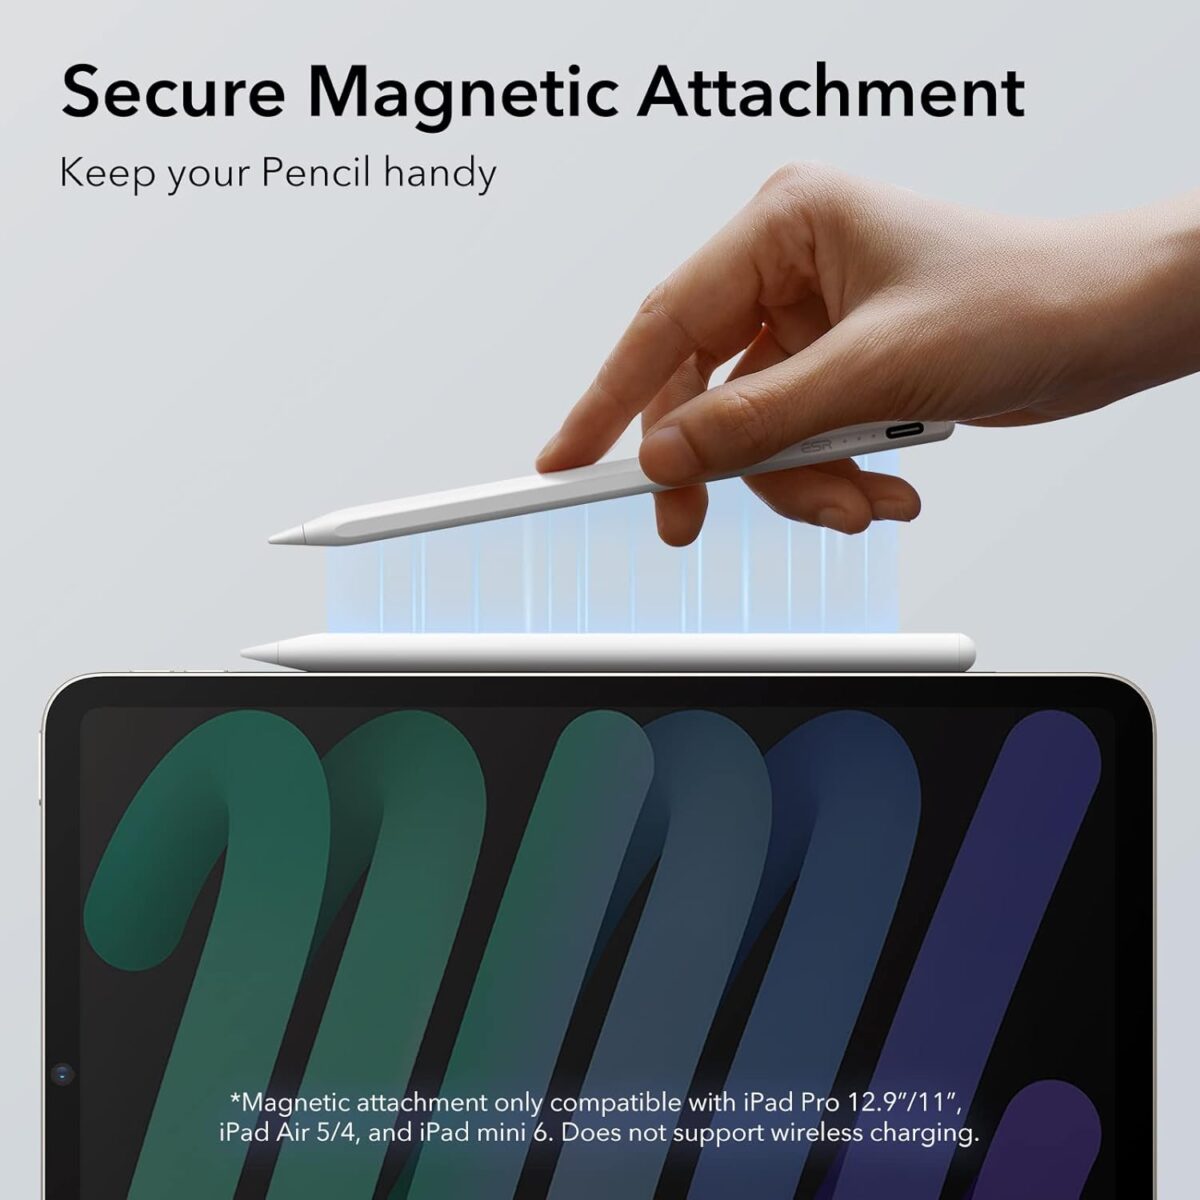 iPad Pencil with Secure magnetic attachment